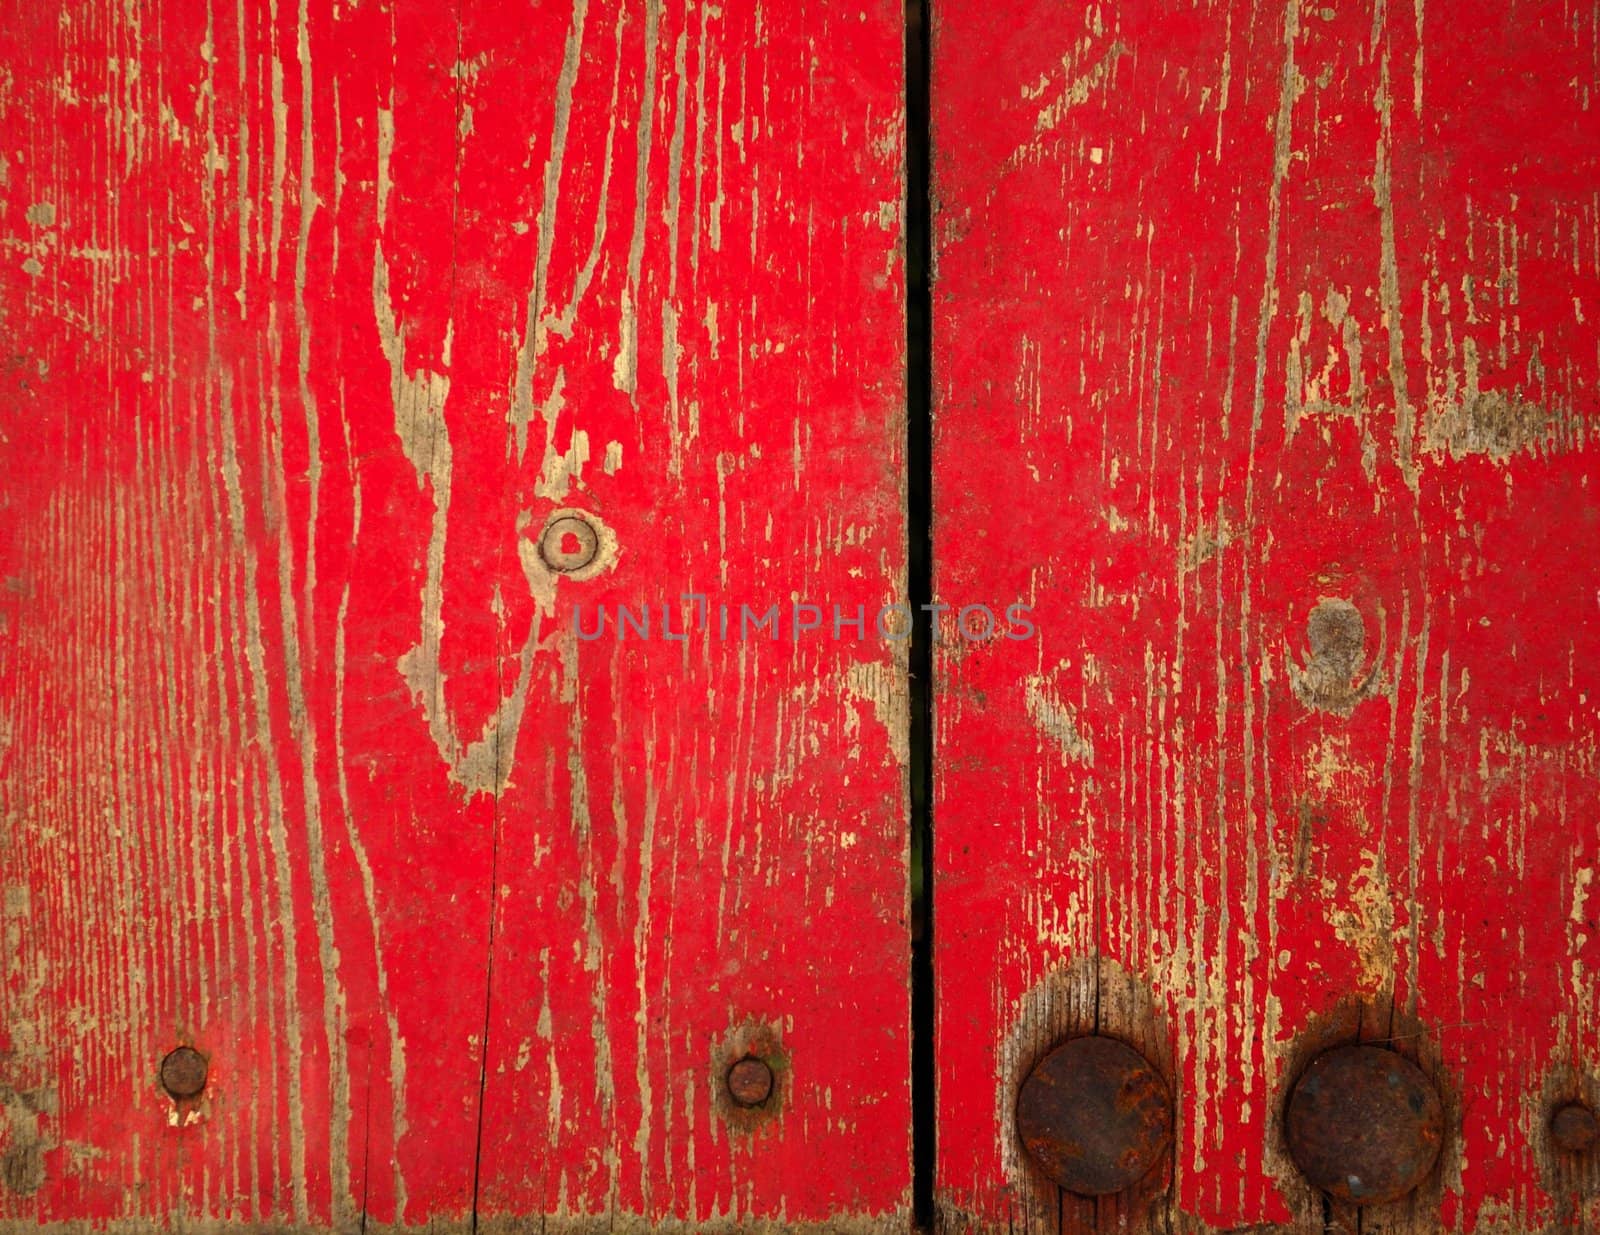 Wood with chipped red paint. Grunge style background by maggiemolloy